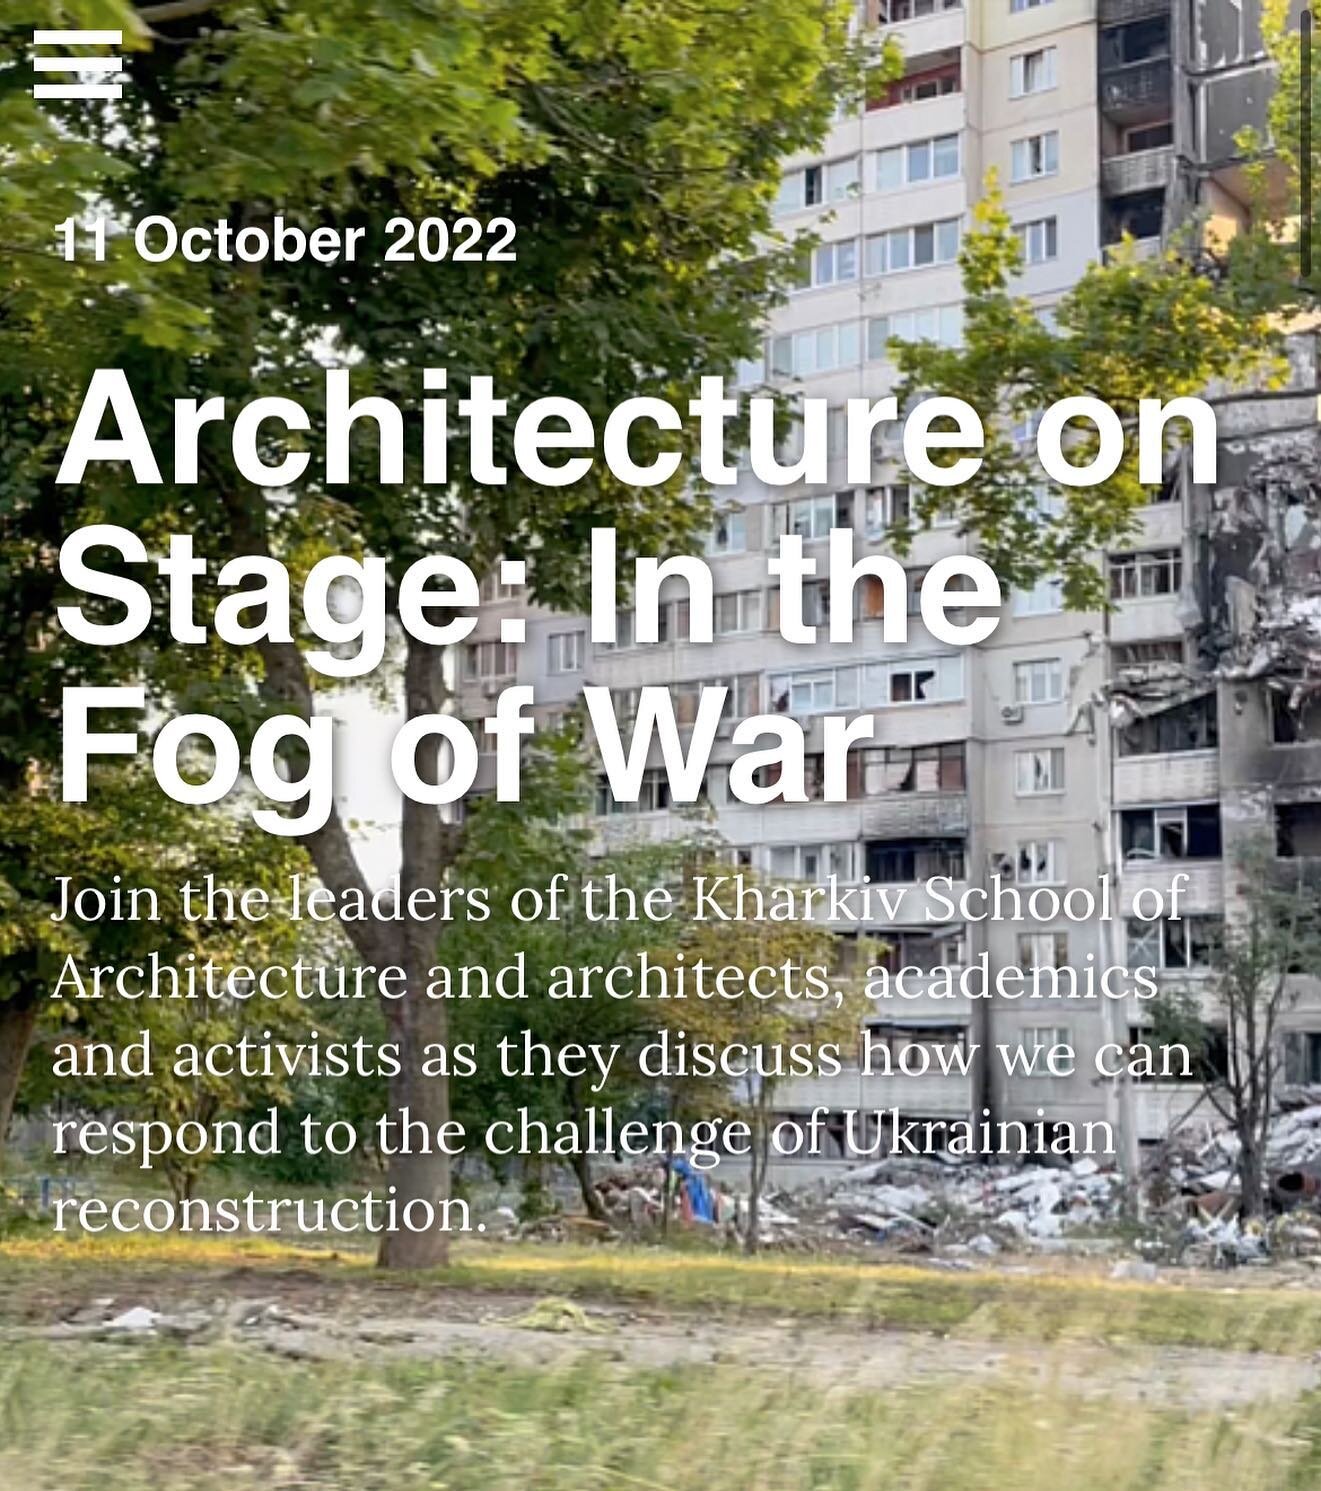 &lsquo;Architecture on Stage: In The Fog of War&rsquo; 

Join us on the 11th October @barbicancentre in London, where we will talk about our work and post-war reconstruction in Sarajevo and Bosnia &amp; Herzegovina and join the discussion on reconstr